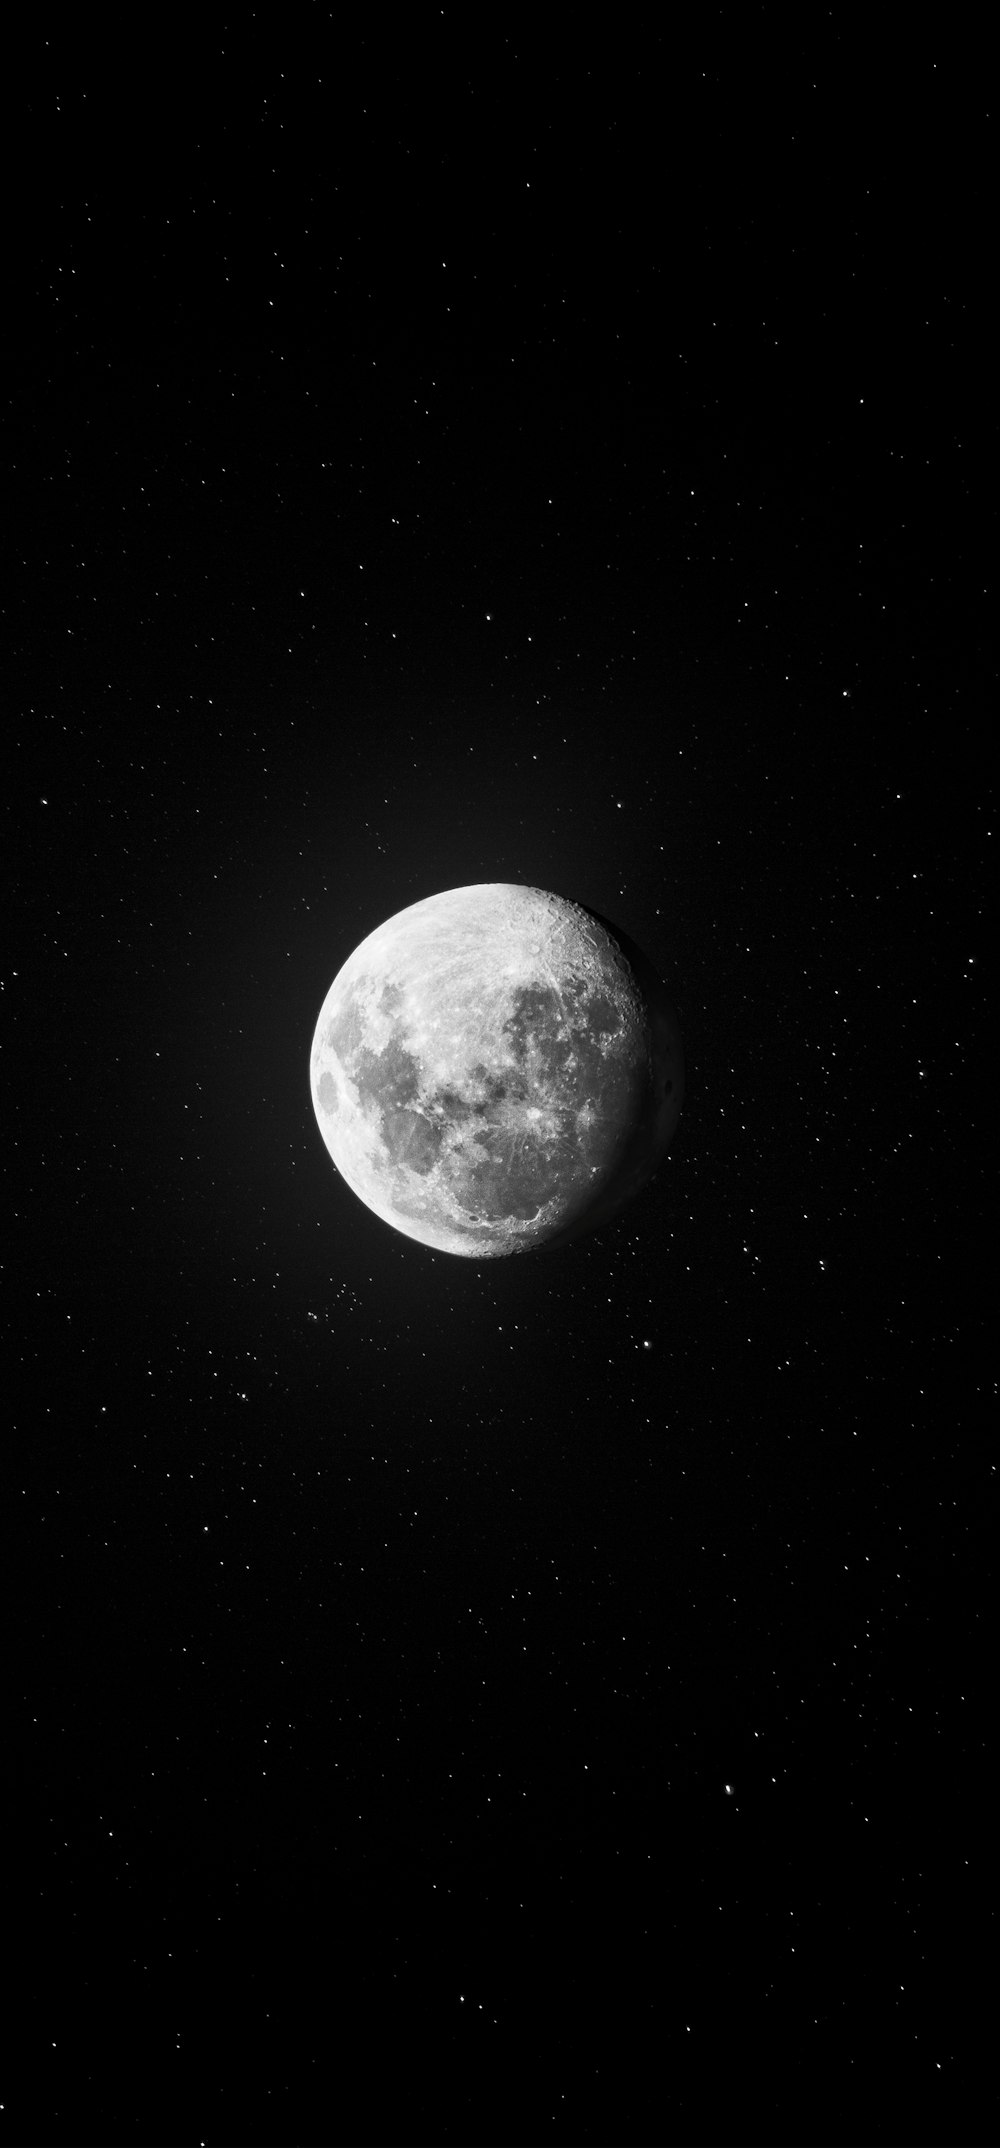 grayscale photo of full moon